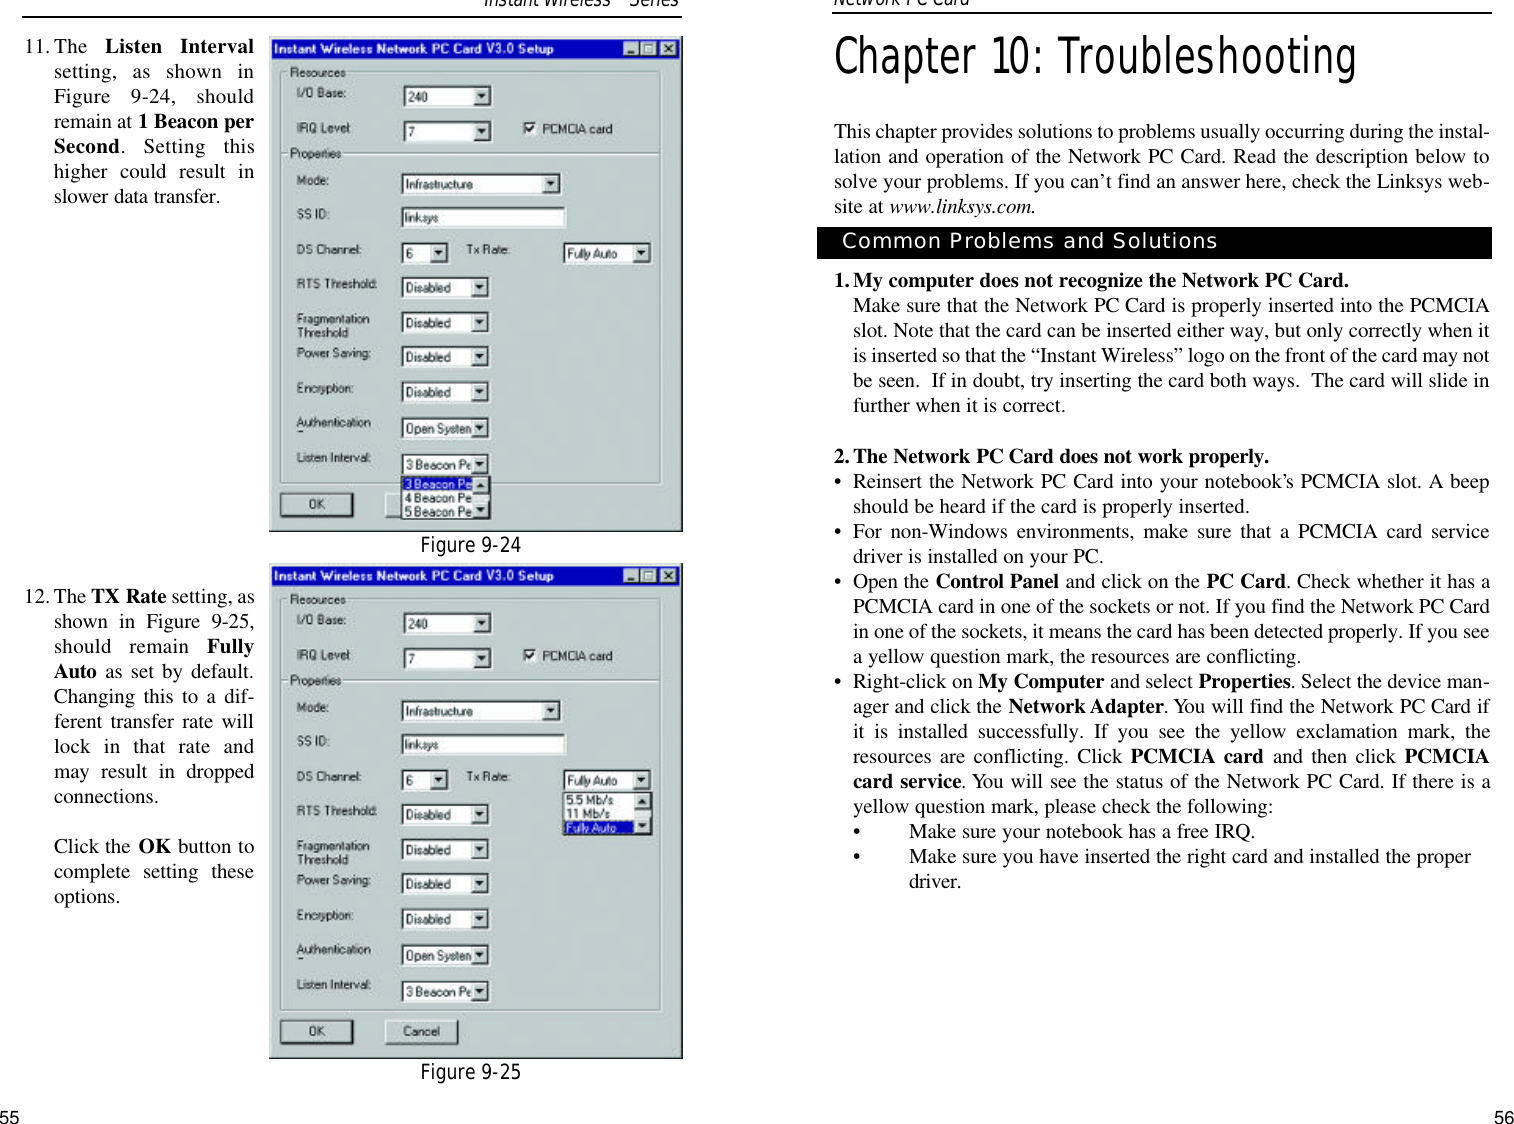 56Chapter 10: TroubleshootingThis chapter provides solutions to problems usually occurring during the instal-lation and operation of the Network PC Card. Read the description below tosolve your problems. If you can’t find an answer here, check the Linksys web-site at www.linksys.com.1.My computer does not recognize the Network PC Card.Make sure that the Network PC Card is properly inserted into the PCMCIAslot. Note that the card can be inserted either way, but only correctly when itis inserted so that the “Instant Wireless” logo on the front of the card may notbe seen.  If in doubt, try inserting the card both ways.  The card will slide infurther when it is correct. 2.The Network PC Card does not work properly.•Reinsert the Network PC Card into your notebook’s PCMCIA slot. A beepshould be heard if the card is properly inserted.•For non-Windows environments, make sure that a PCMCIA card servicedriver is installed on your PC.•Open the Control Panel and click on the PC Card. Check whether it has aPCMCIA card in one of the sockets or not. If you find the Network PC Cardin one of the sockets, it means the card has been detected properly. If you seea yellow question mark, the resources are conflicting.•Right-click on My Computer and select Properties. Select the device man-ager and click the Network Adapter. You will find the Network PC Card ifit is installed successfully. If you see the yellow exclamation mark, theresources are conflicting. Click PCMCIA card and then click PCMCIAcard service. You will see the status of the Network PC Card. If there is ayellow question mark, please check the following:•Make sure your notebook has a free IRQ.•Make sure you have inserted the right card and installed the properdriver.Common Problems and SolutionsNetwork PC Card 11. The  Listen Intervalsetting, as shown inFigure 9-24, shouldremain at 1 Beacon perSecond. Setting thishigher could result inslower data transfer.12. The TX Rate setting, asshown in Figure 9-25,should remain FullyAuto as set by default.Changing this to a dif-ferent transfer rate willlock in that rate andmay result in droppedconnections. Click the OK button tocomplete setting theseoptions.Figure 9-24Figure 9-25Instant WirelessTMSeries55